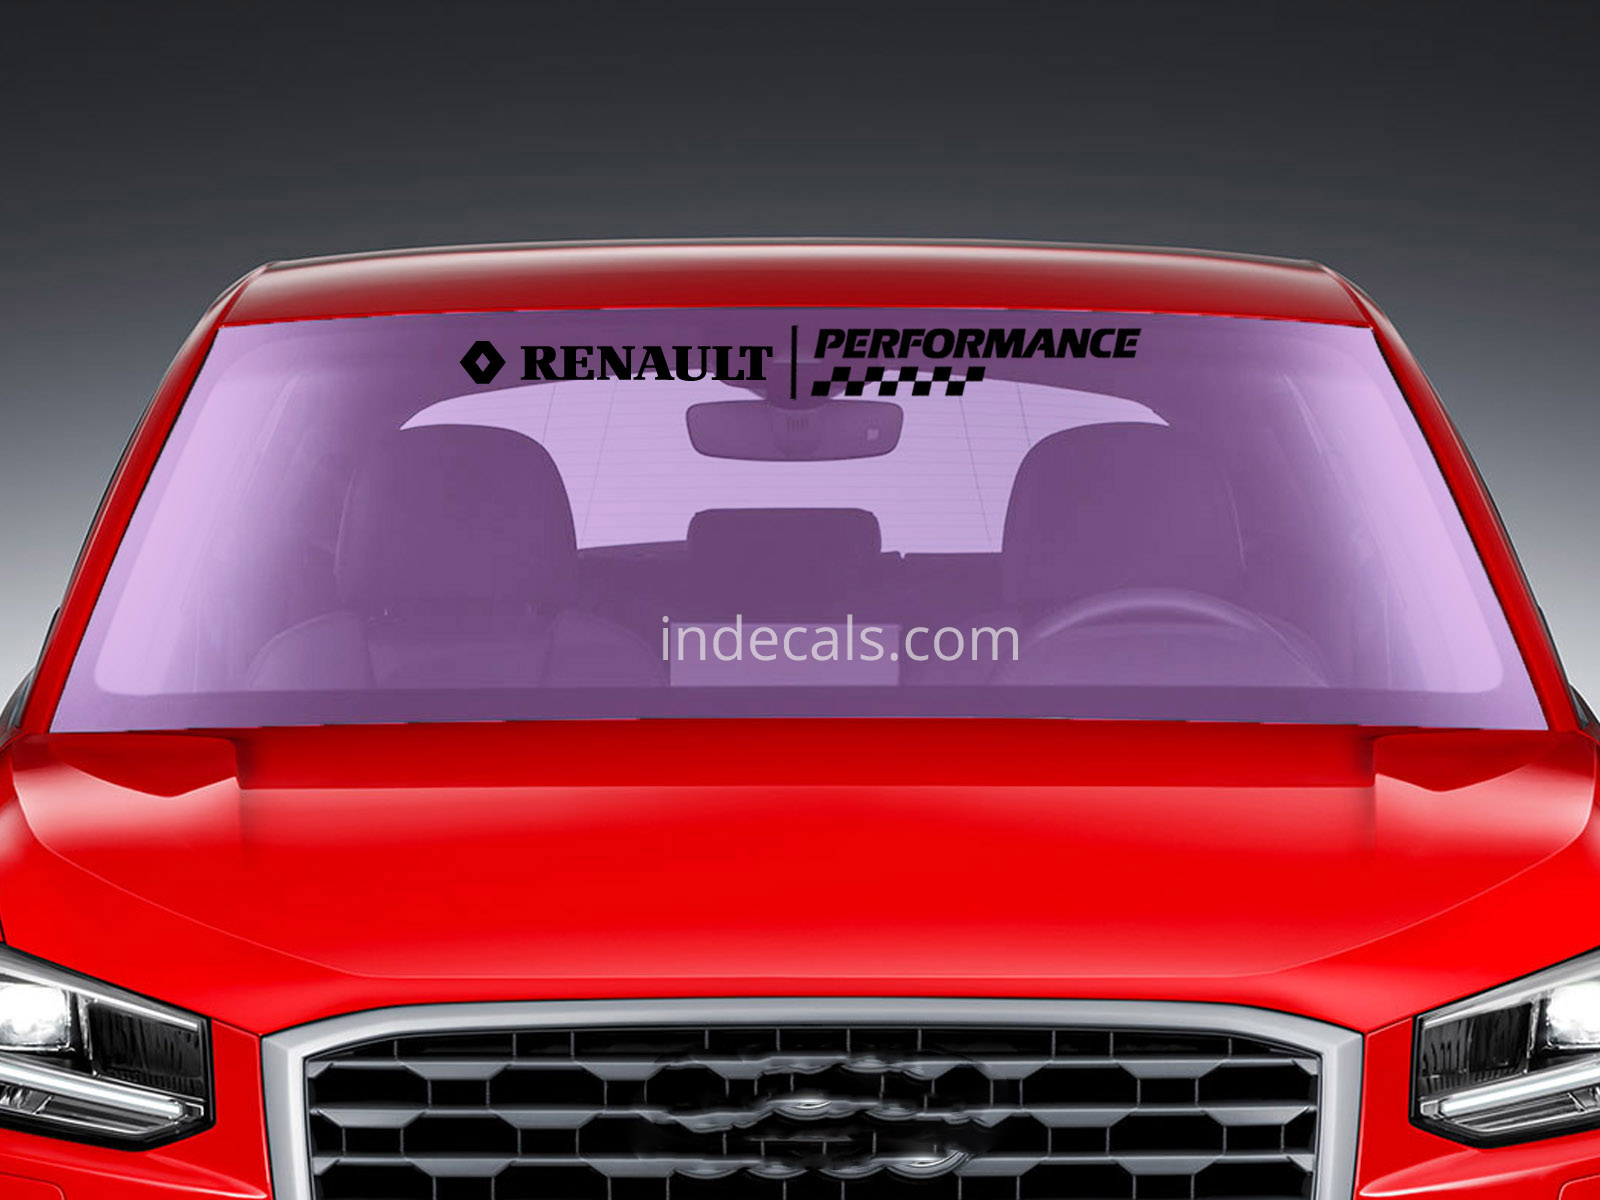 1 x Renault Performance Sticker for Windshield or Back Window - Black